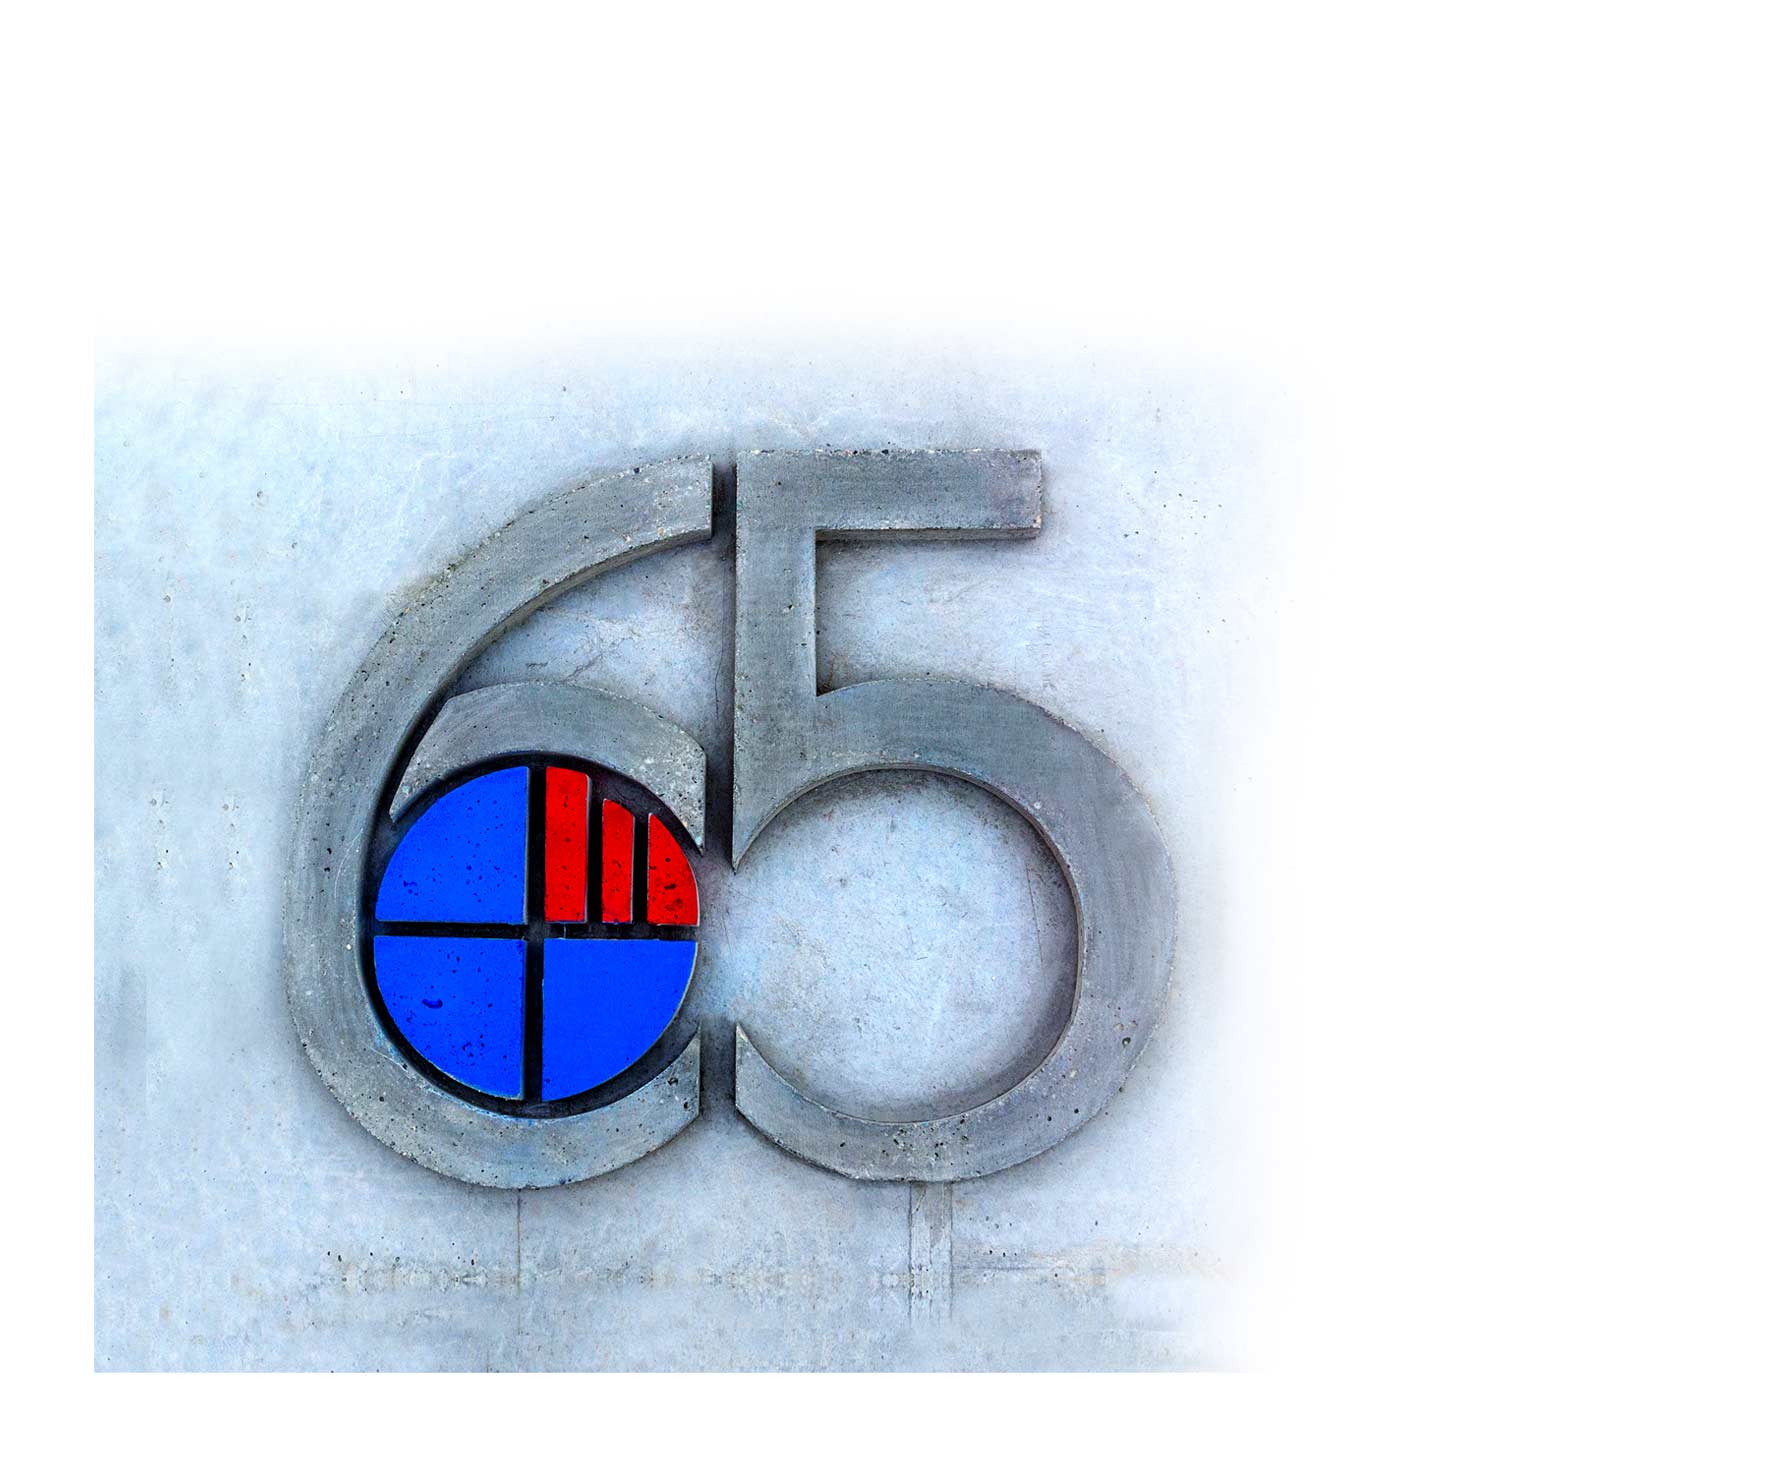 Design and Execution of 65th Anniversary General Mechanics Company Dedication (Concrete & Steel) 